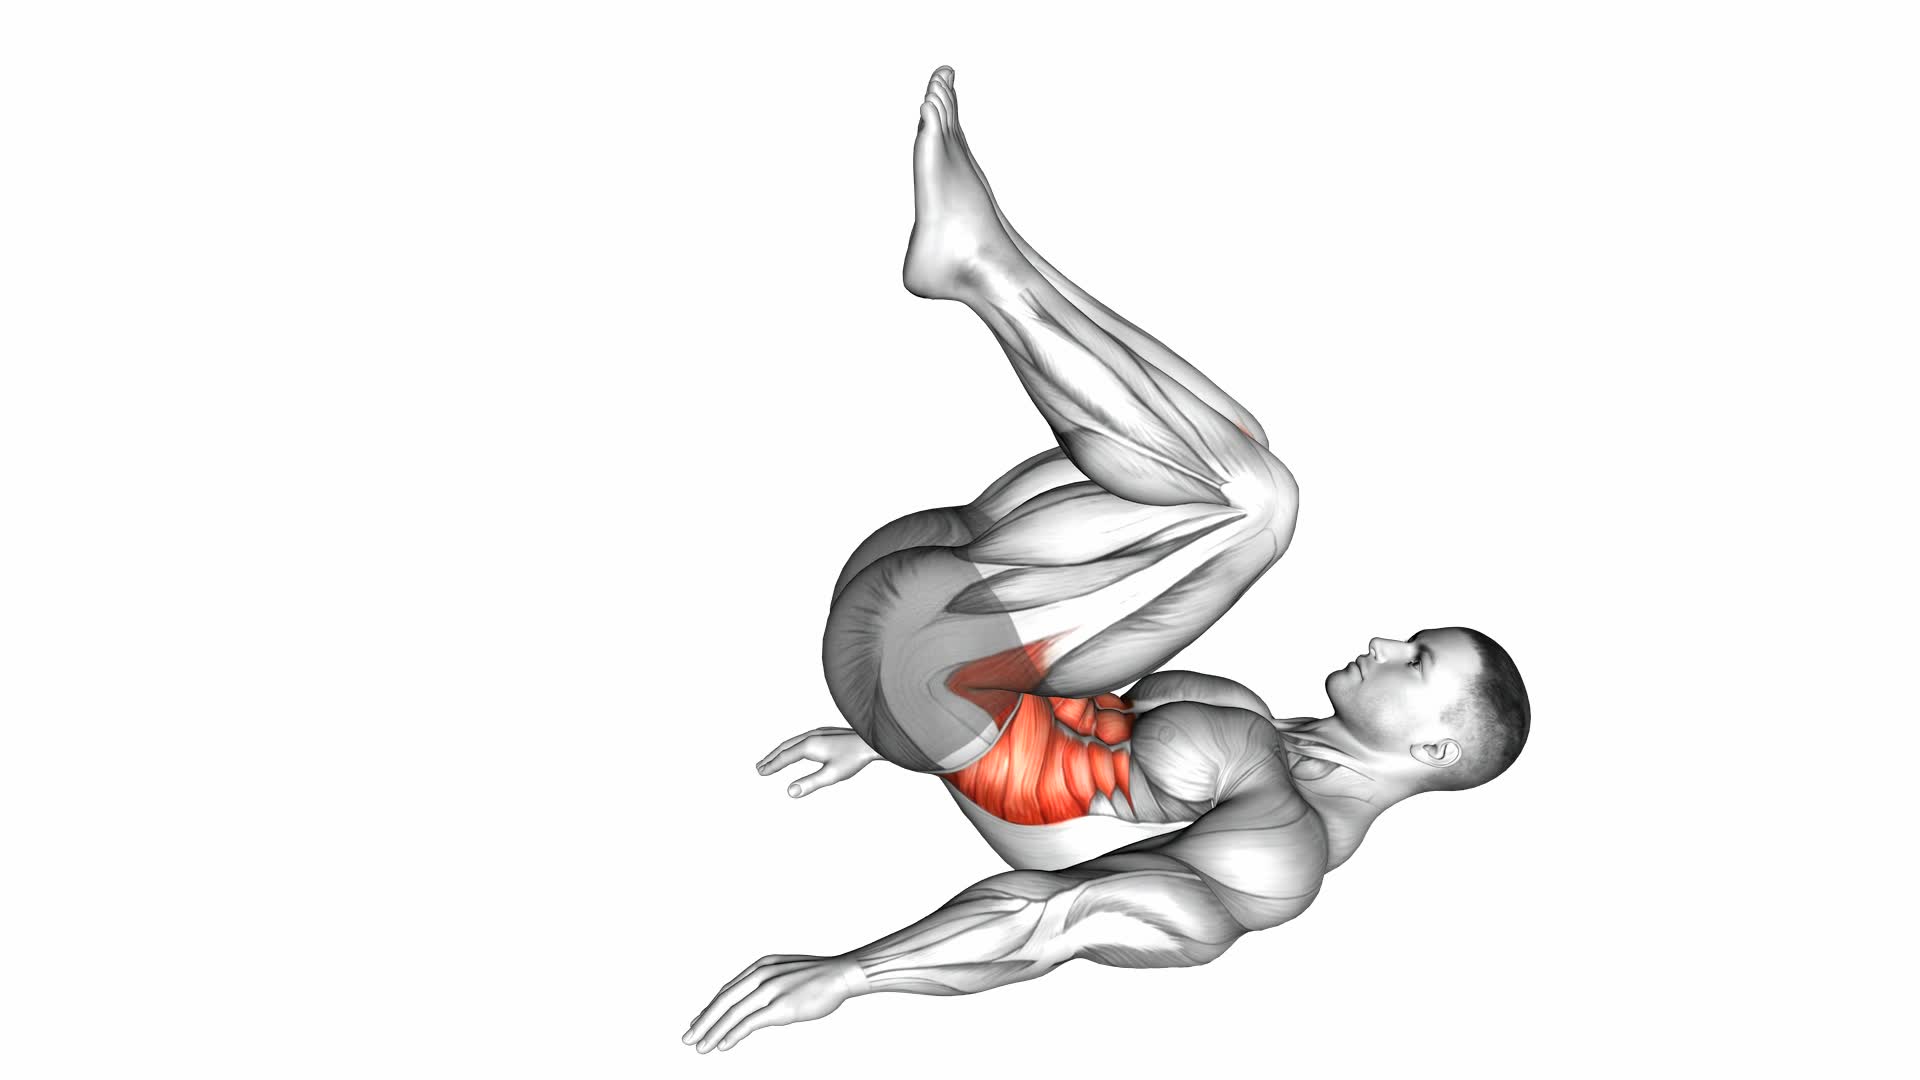 Hip Raise (Bent Knee) - Video Exercise Guide & Tips